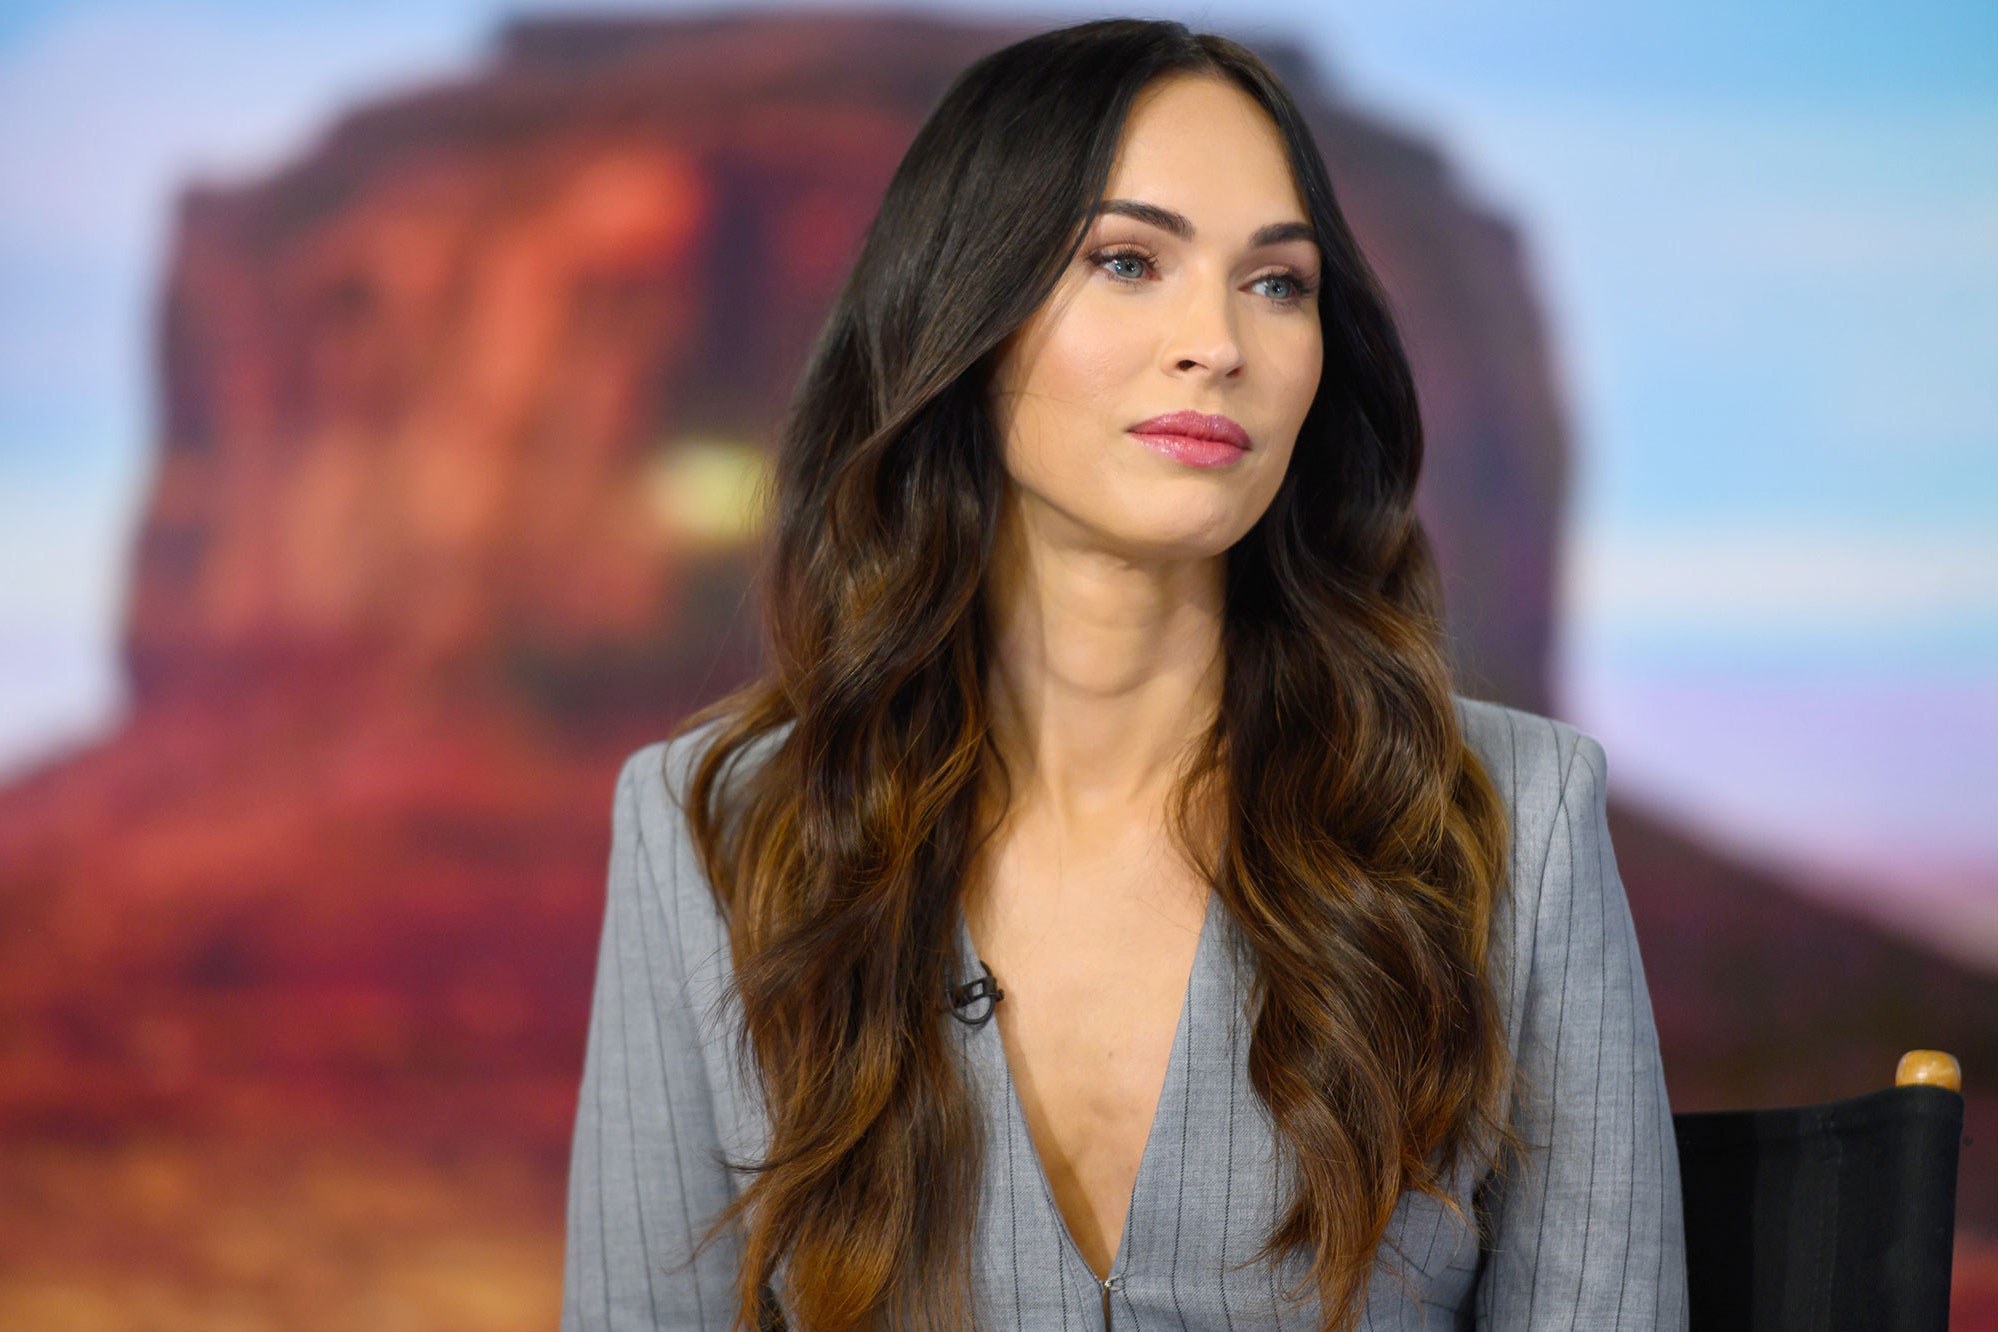 MEGAN FOX DITCHES WEDDING RING DURING PROMO … But ‘Green’ is Still Her Family Name